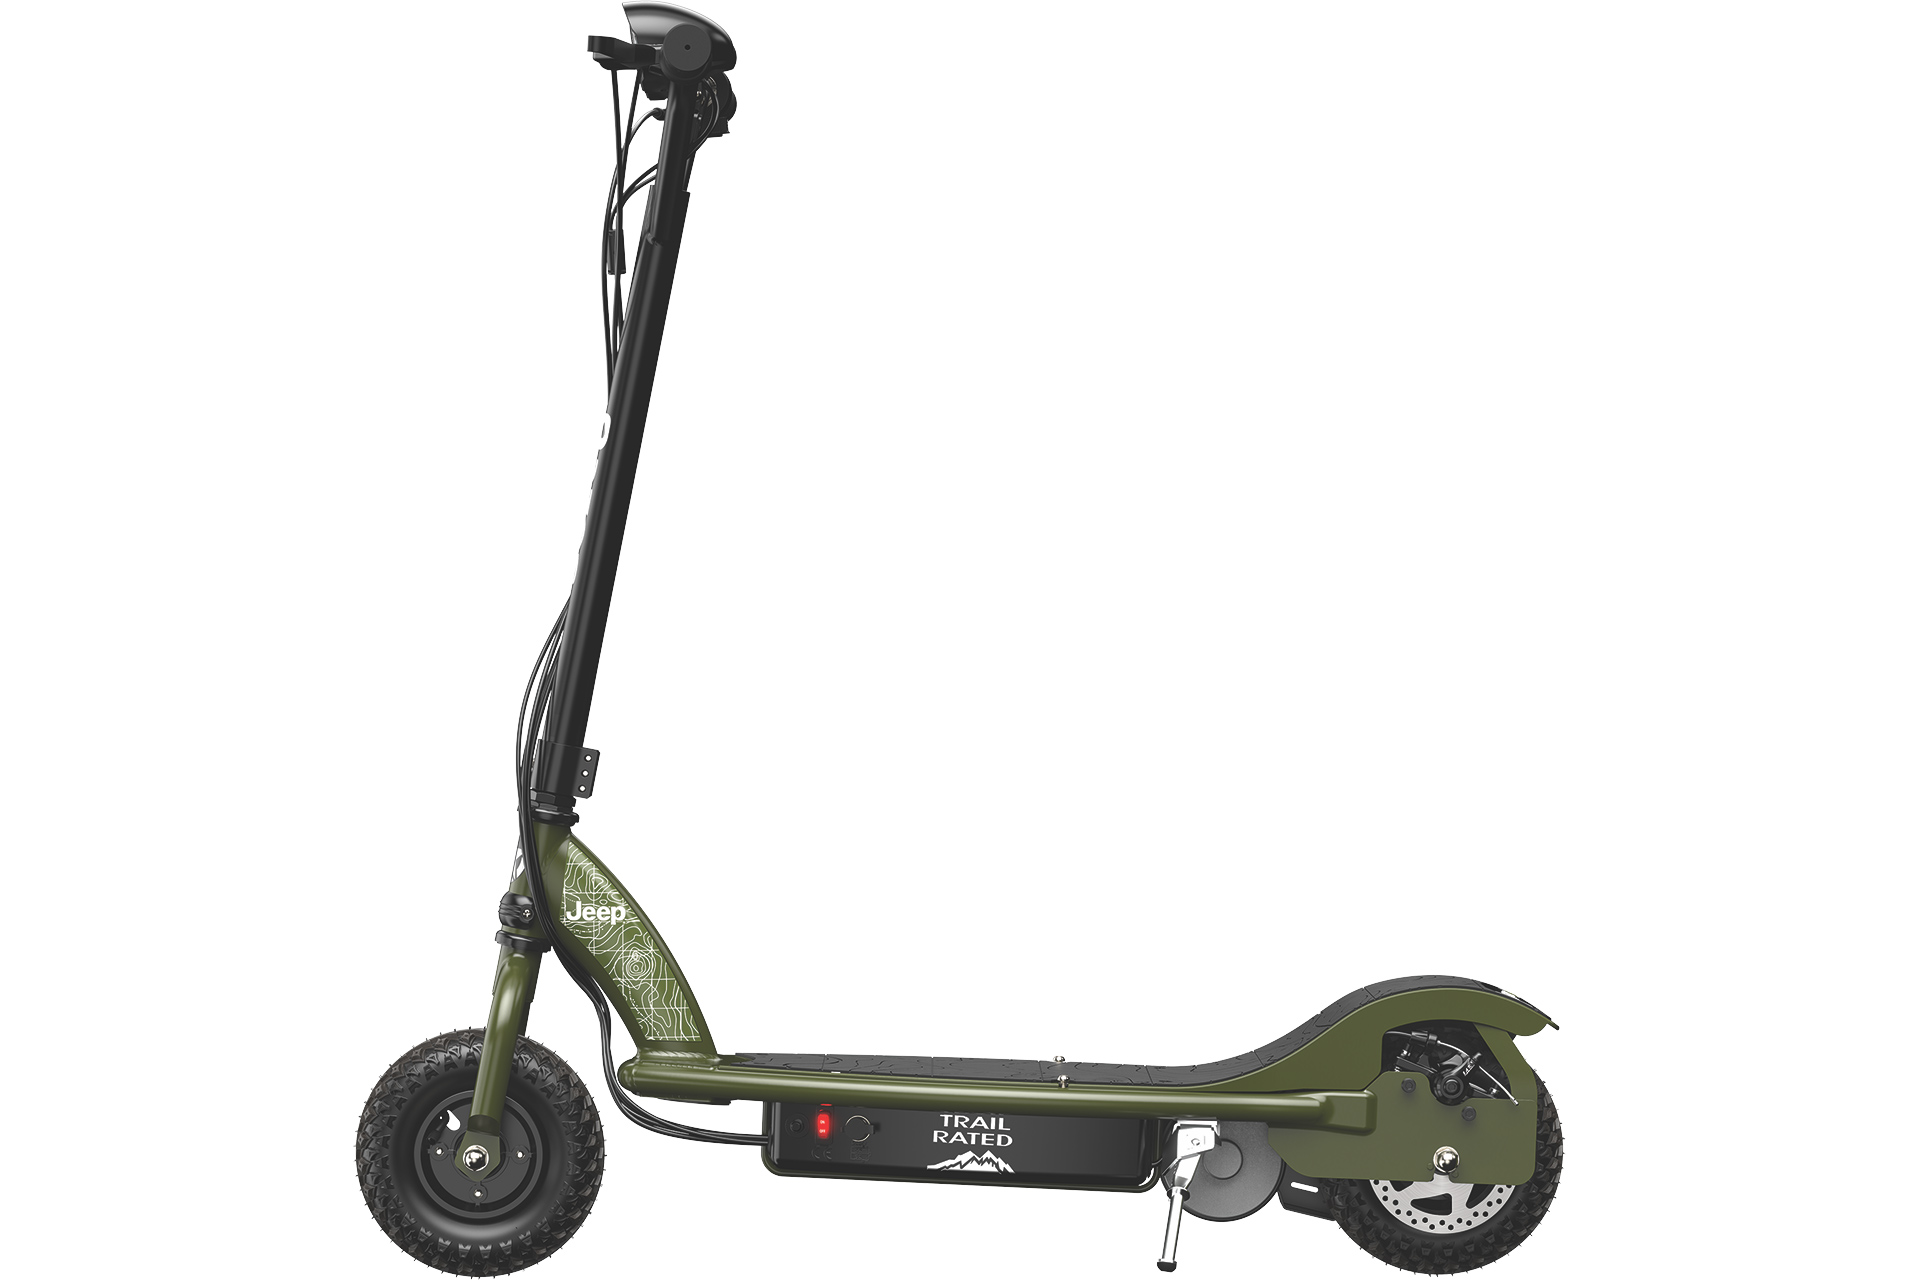 Jeep and Razor made an off-road electric scooter